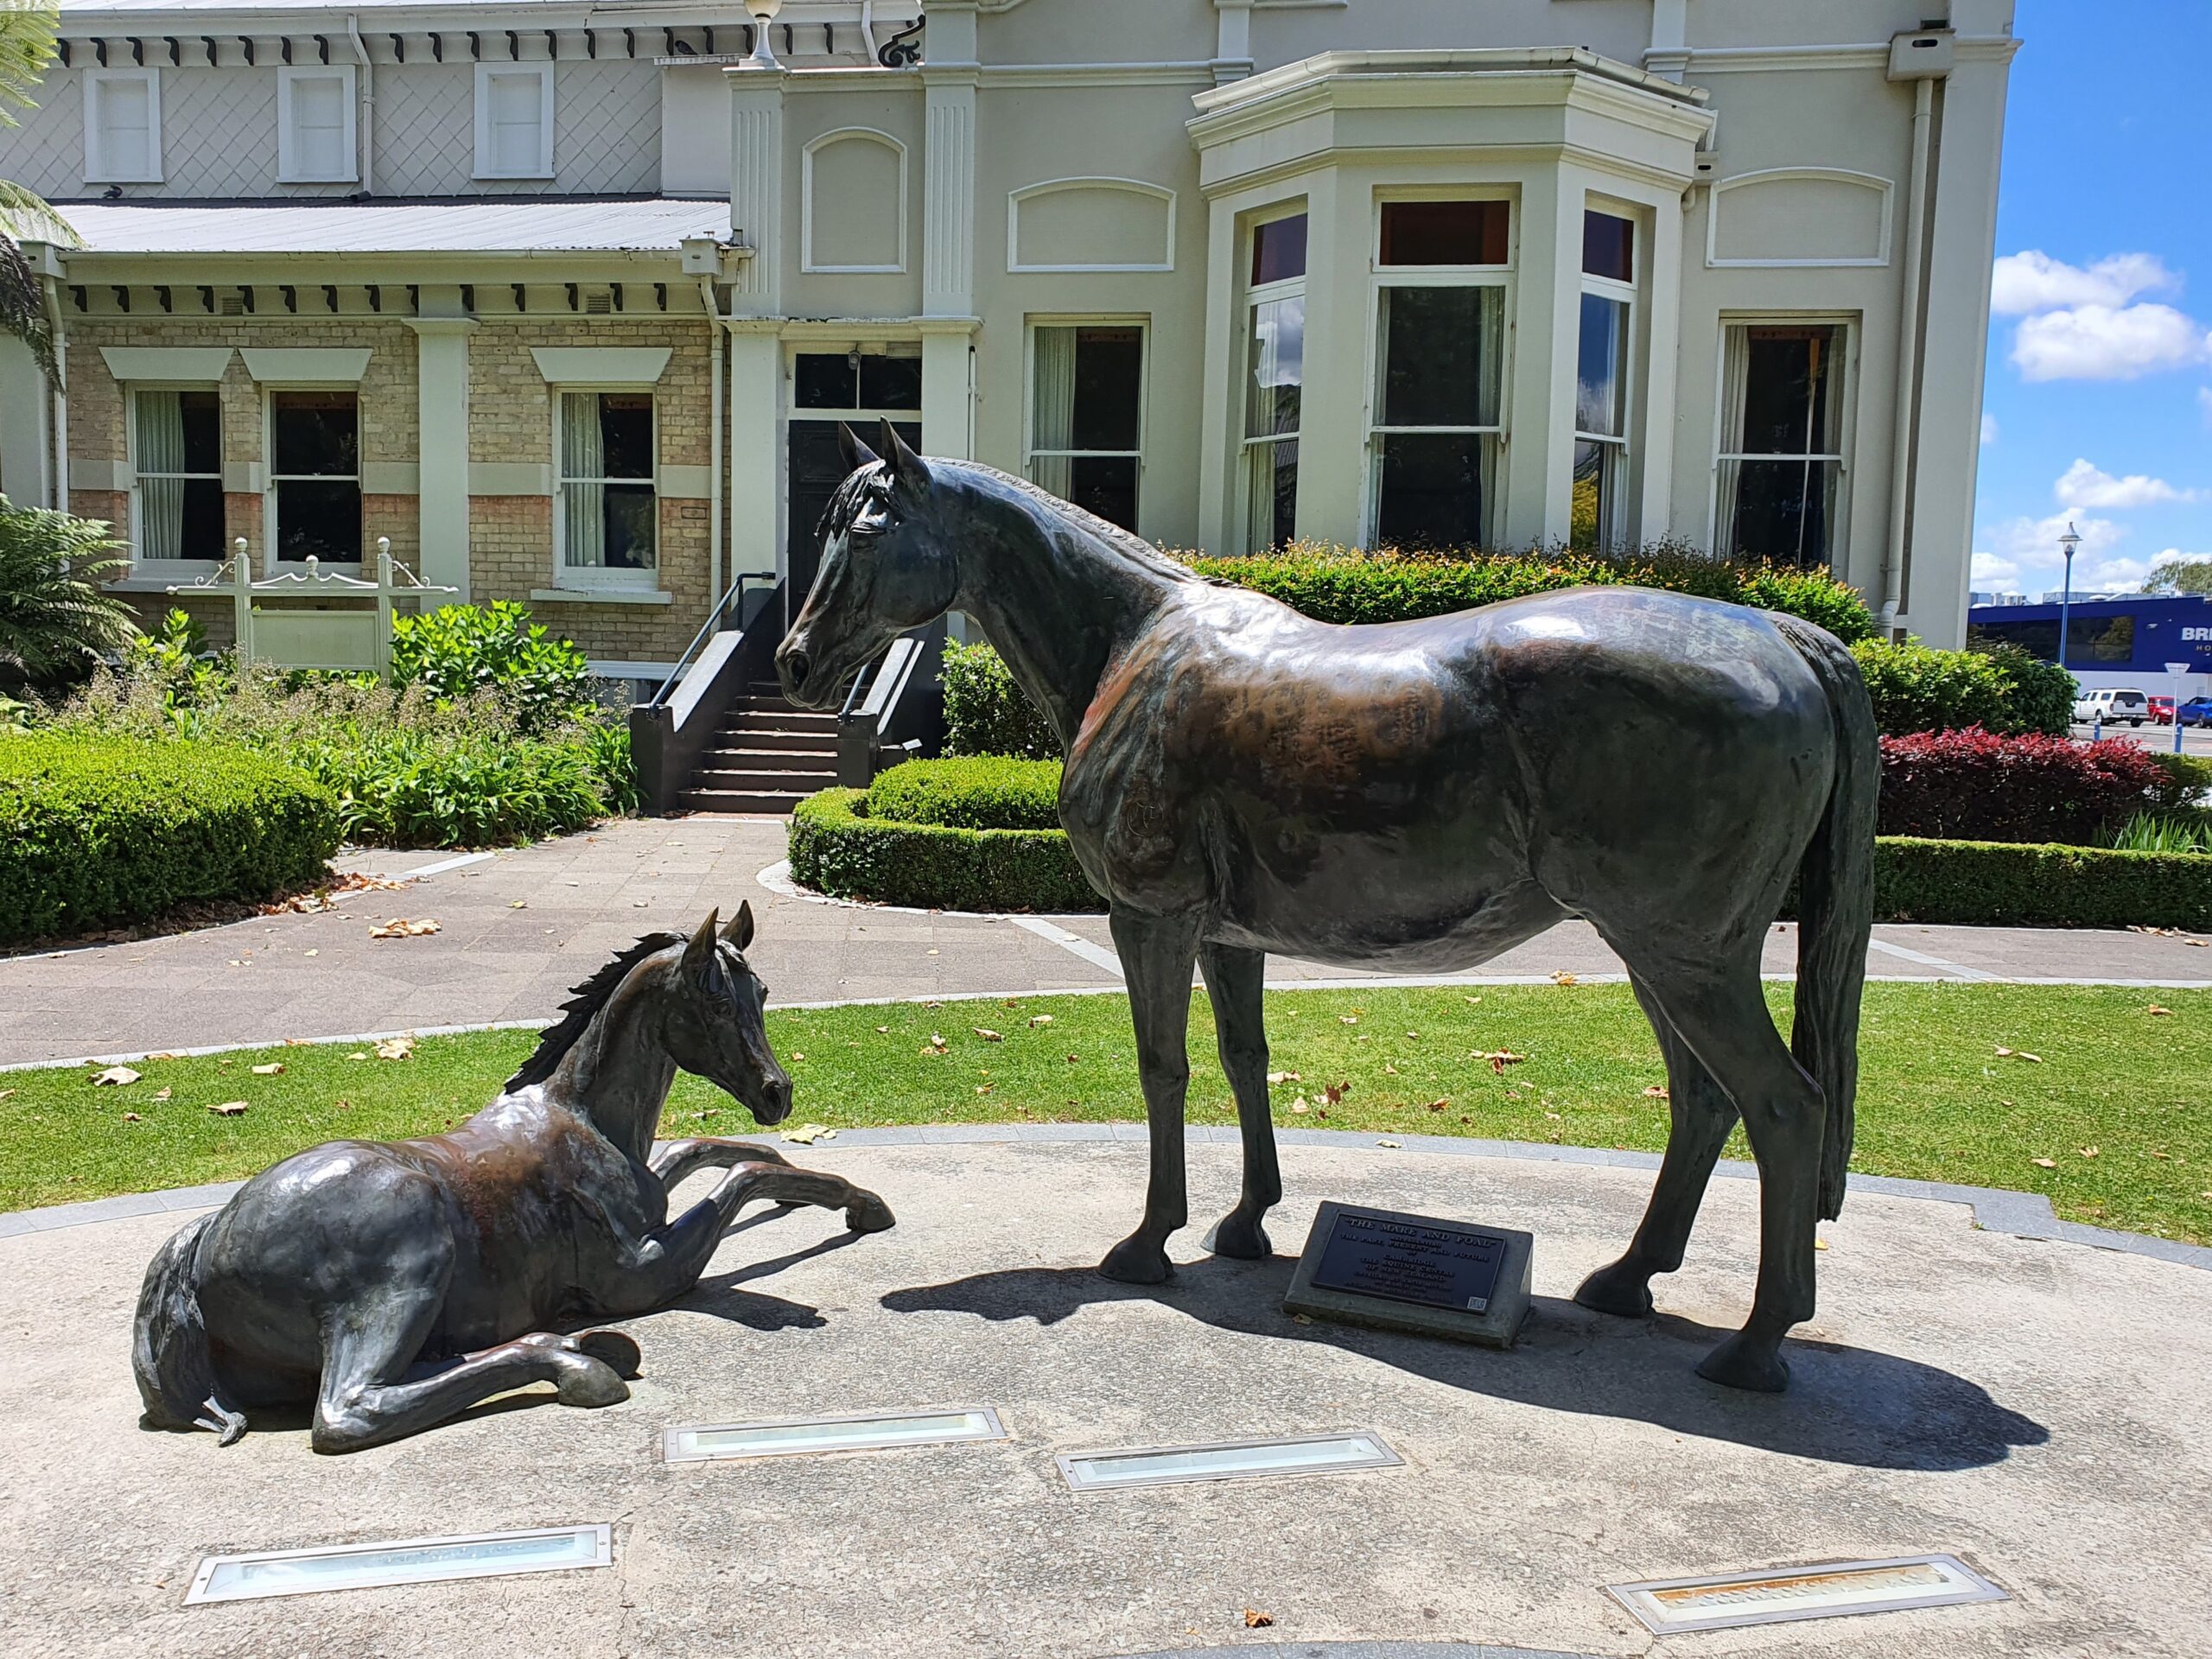 Photo of a horse and mare statue in Cambridge, Waikato, New Zealand.